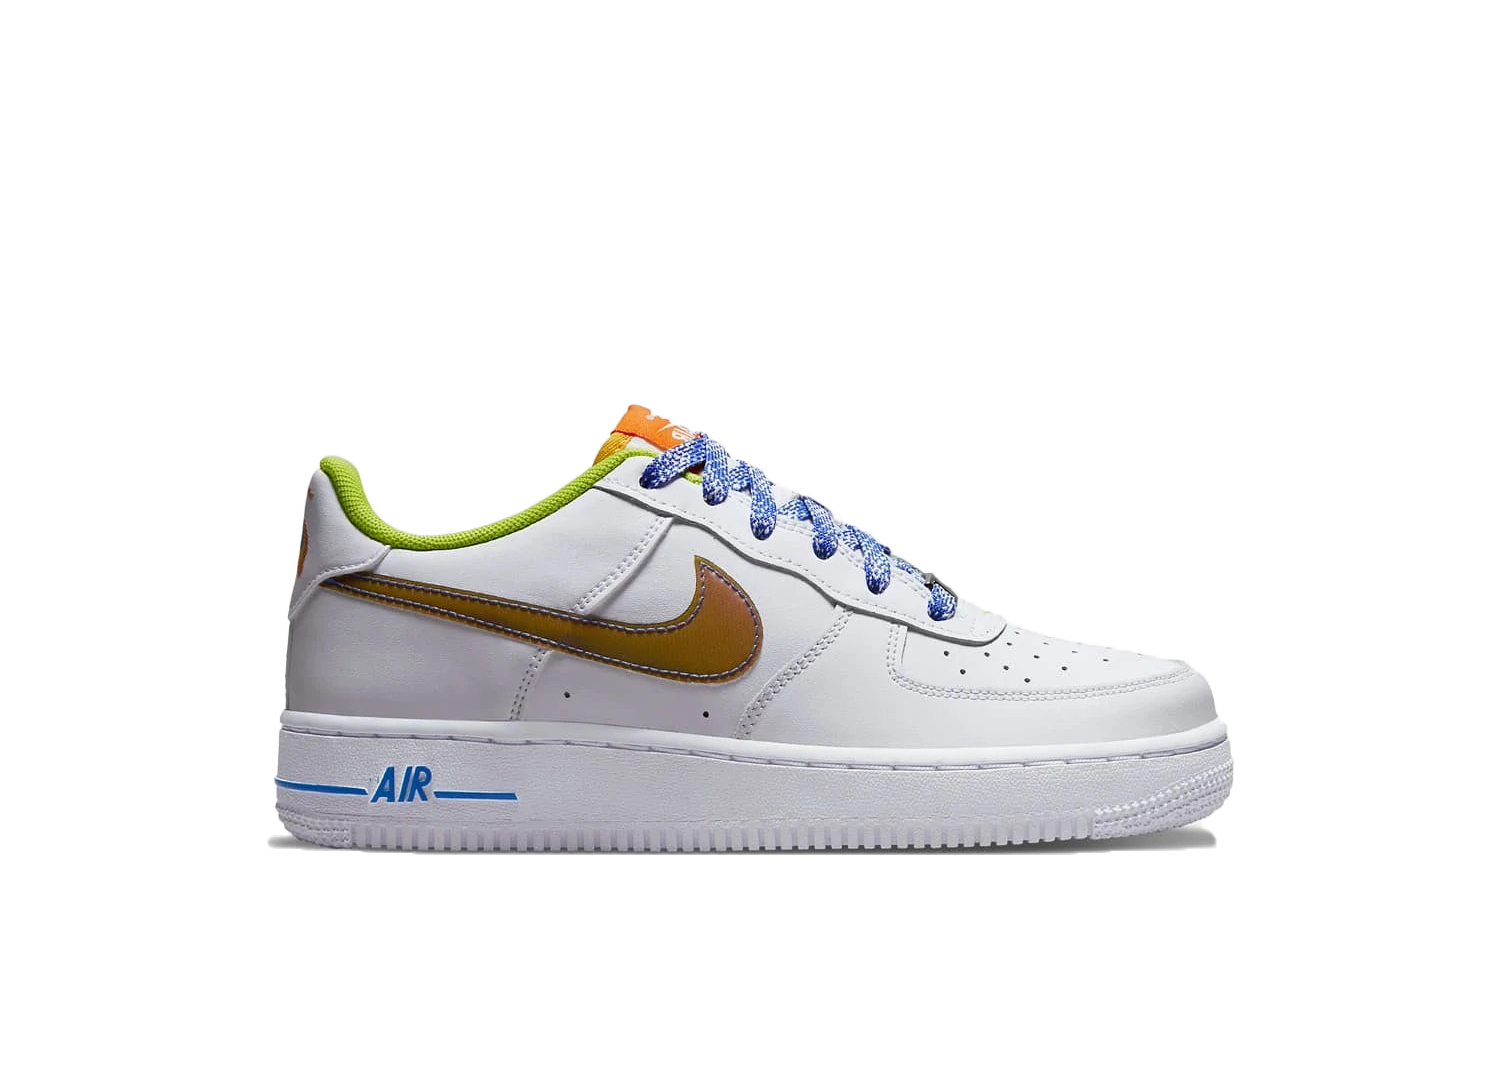 stockx color changing air force 1